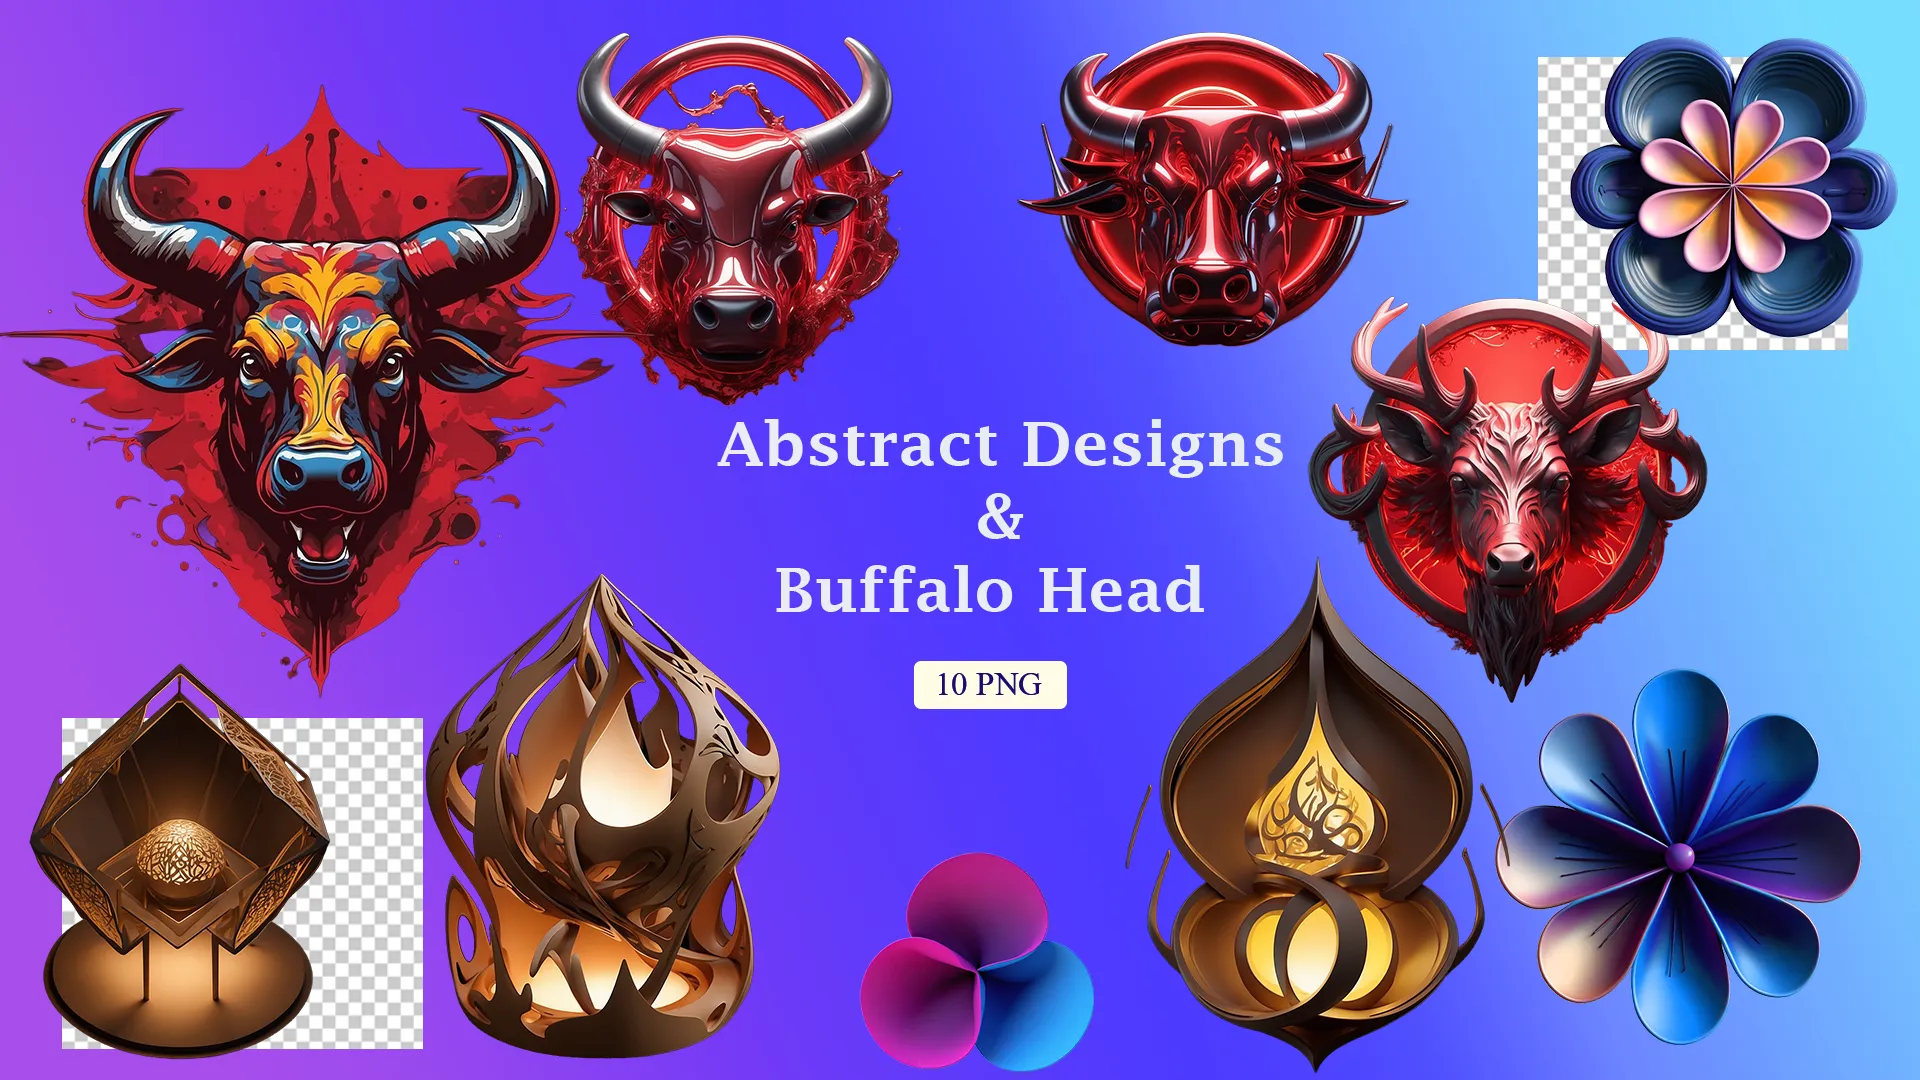 Mystical Buffalo Heads and Floral Art Creative PNG Set